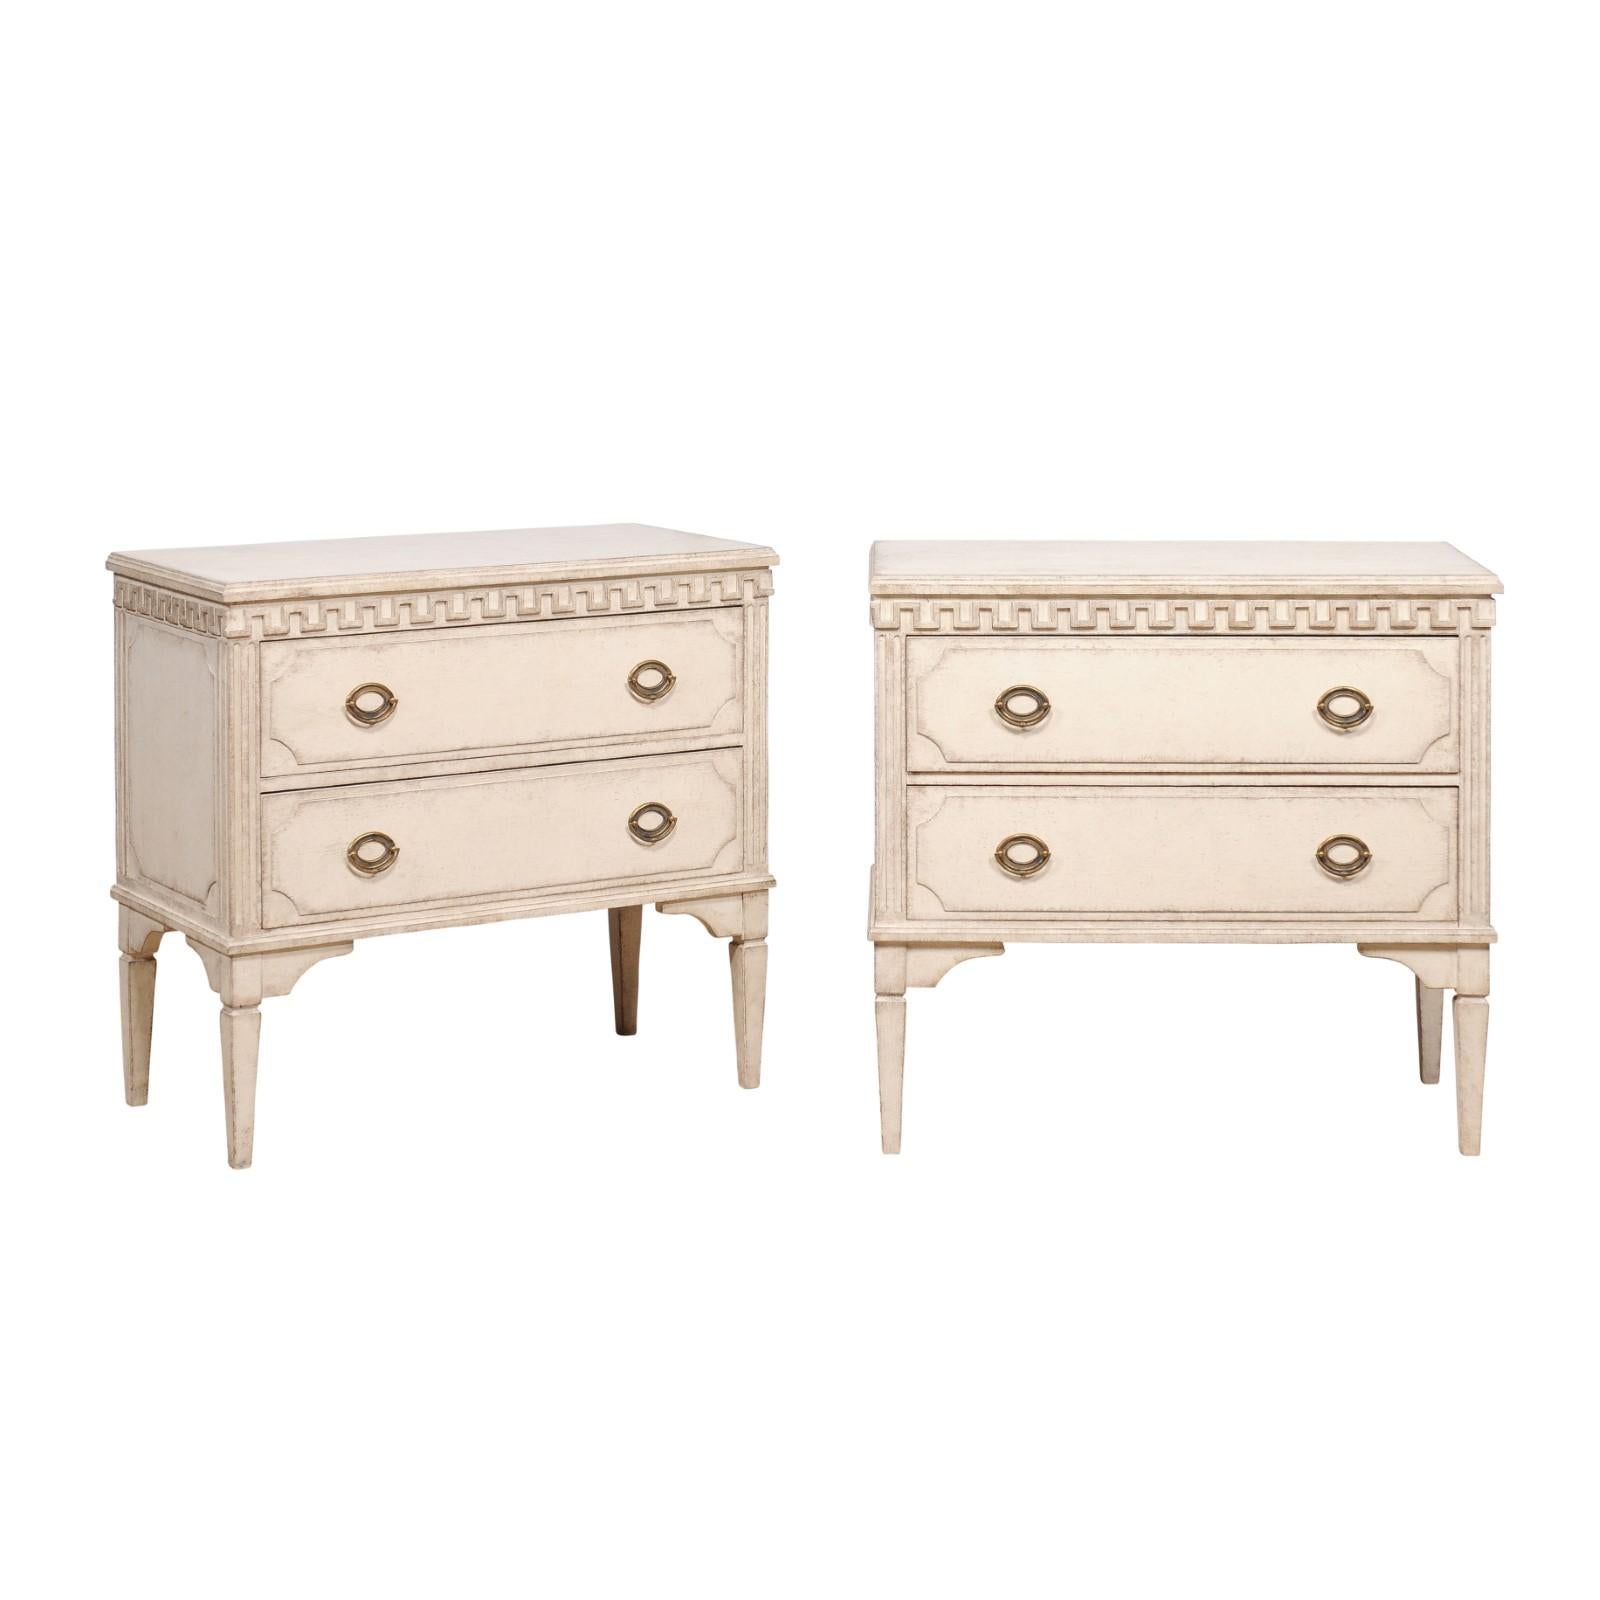 A pair of Swedish Gustavian style chests from the 19th century with antique off white / cream painted finish, carved Greek Key frieze, two drawers and tapered legs. Step into the epitome of 19th-century Swedish design with this resplendent pair of